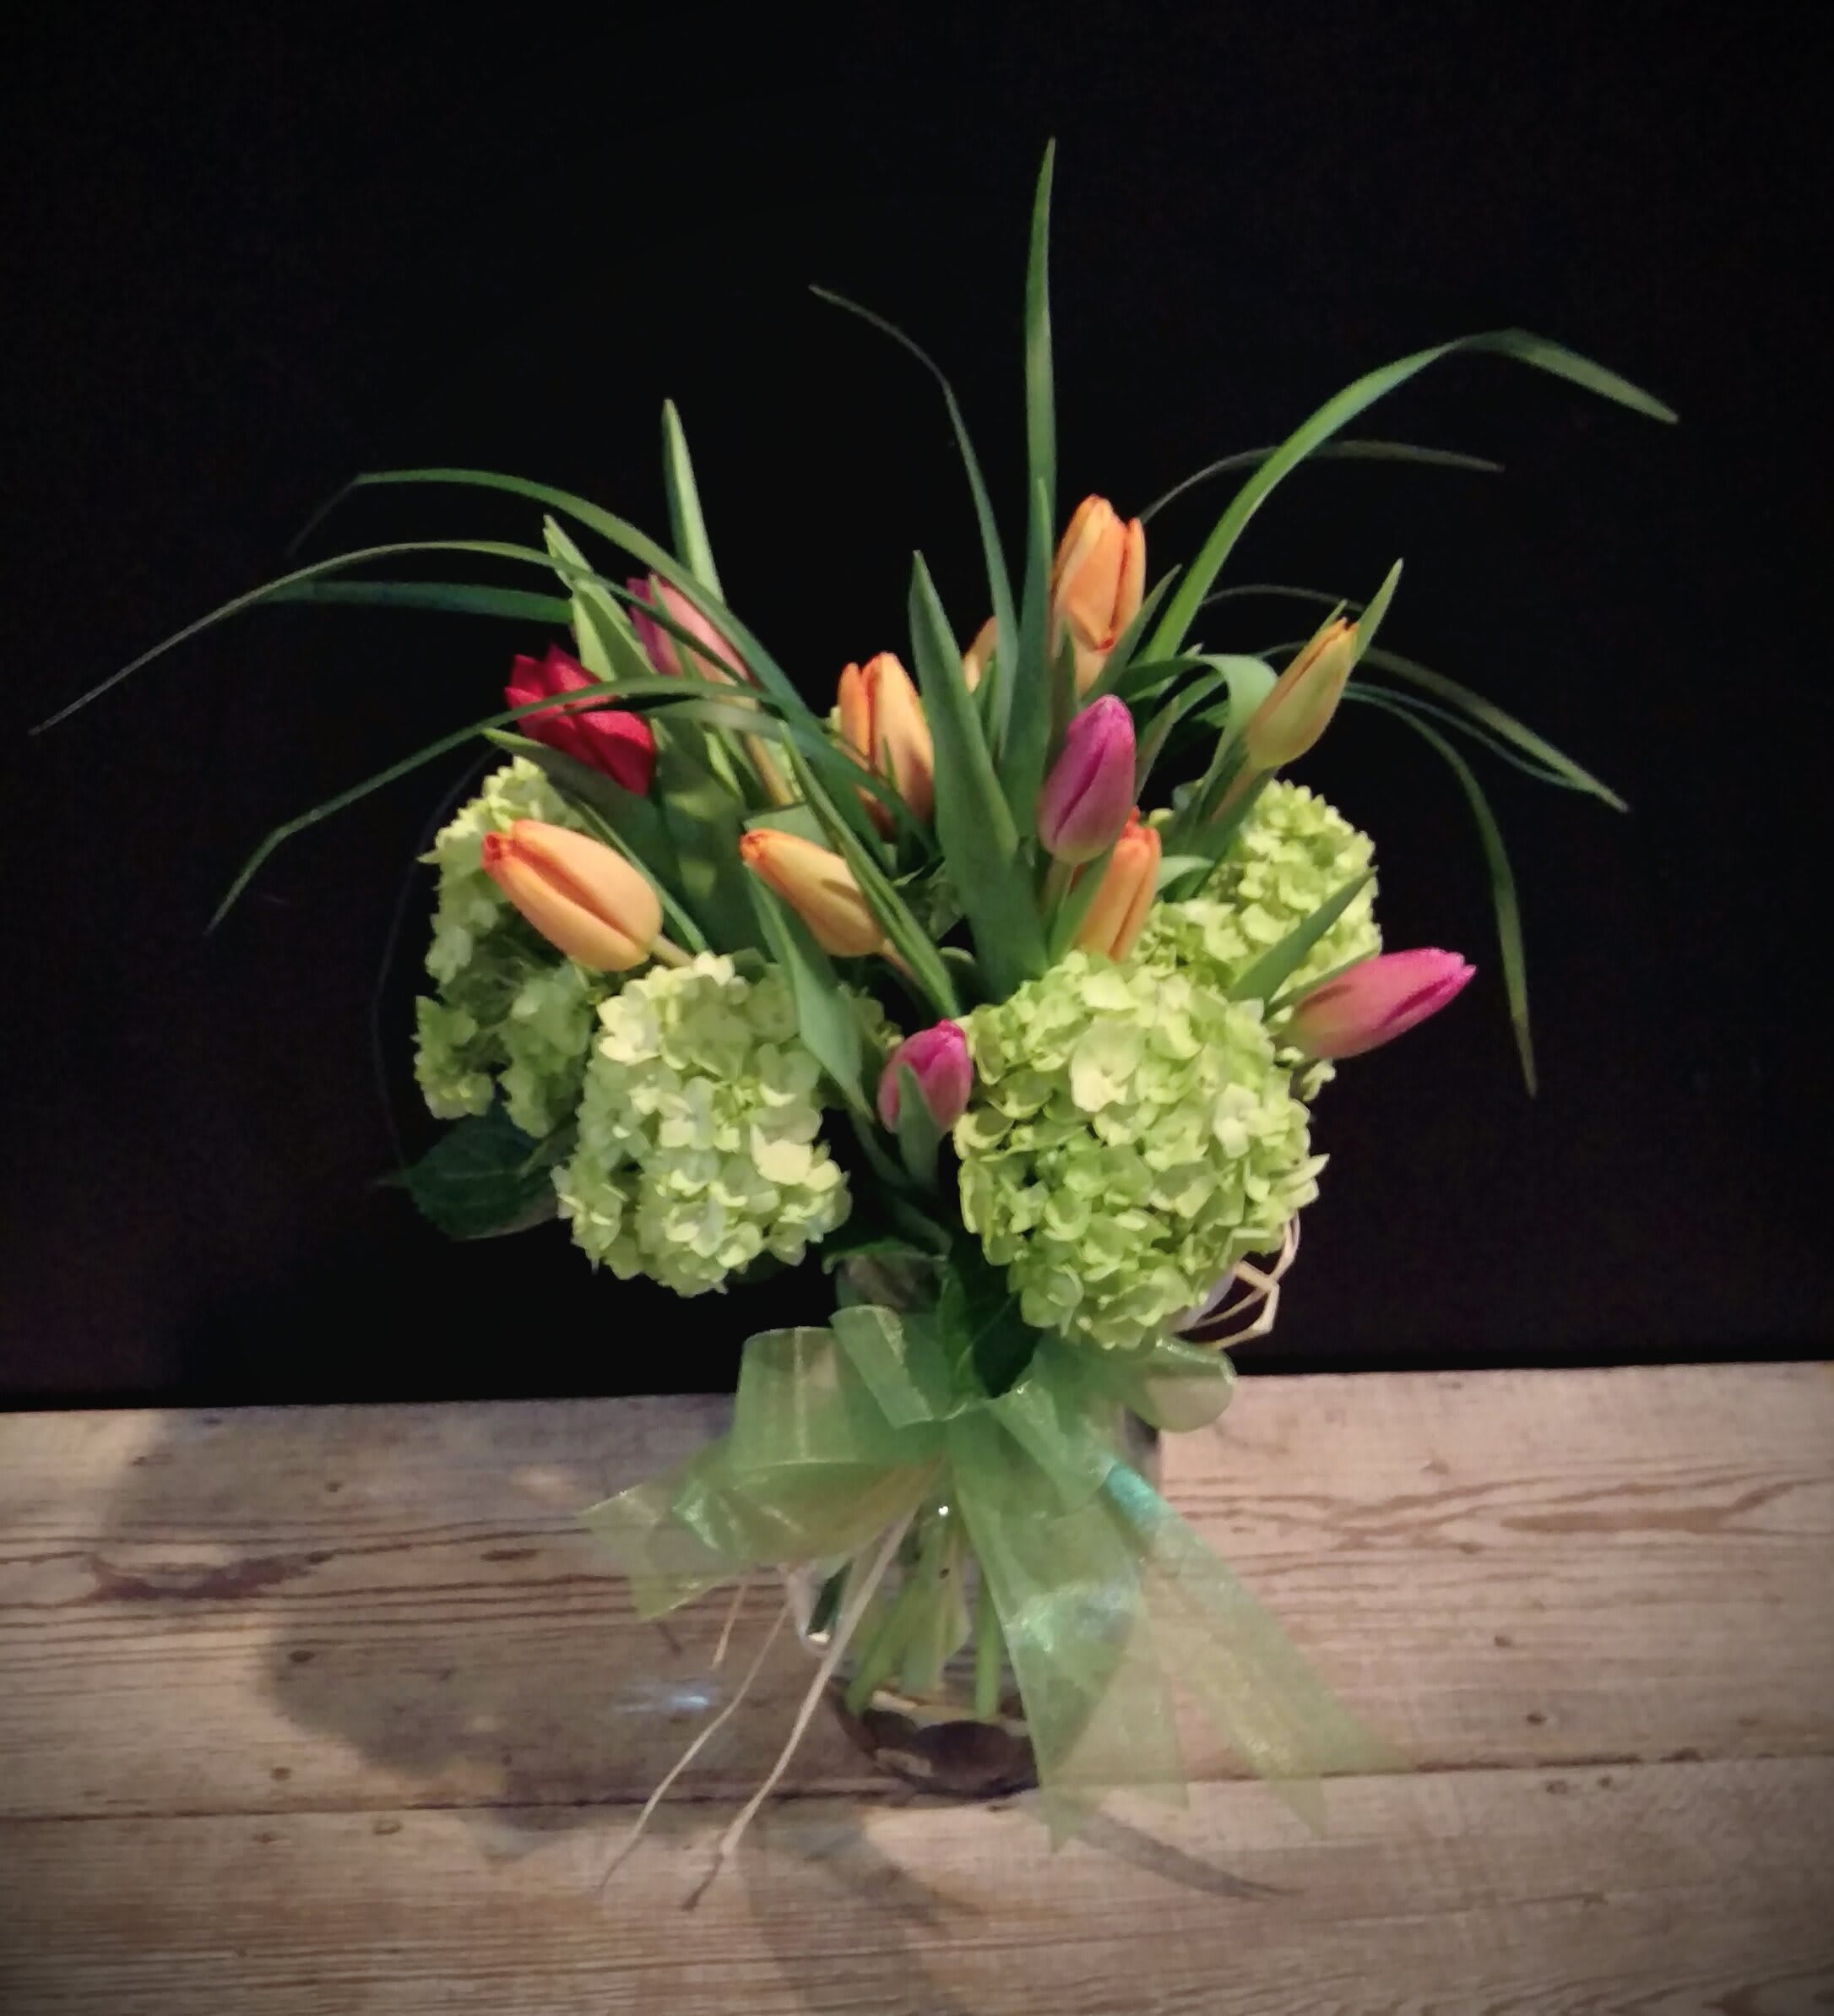 Happy Kiss (tulip colors vary) - This &quot;kiss&quot; features 15 Dutch &quot;tu-lips&quot; in assorted colors springing from bright vibrant green hydrangea.  Gathered with grasses and placed in a vase with riverstones and ribbons...  Perfect way to send your loving wishes for brighter days ahead..   Tulip colors vary weekly  